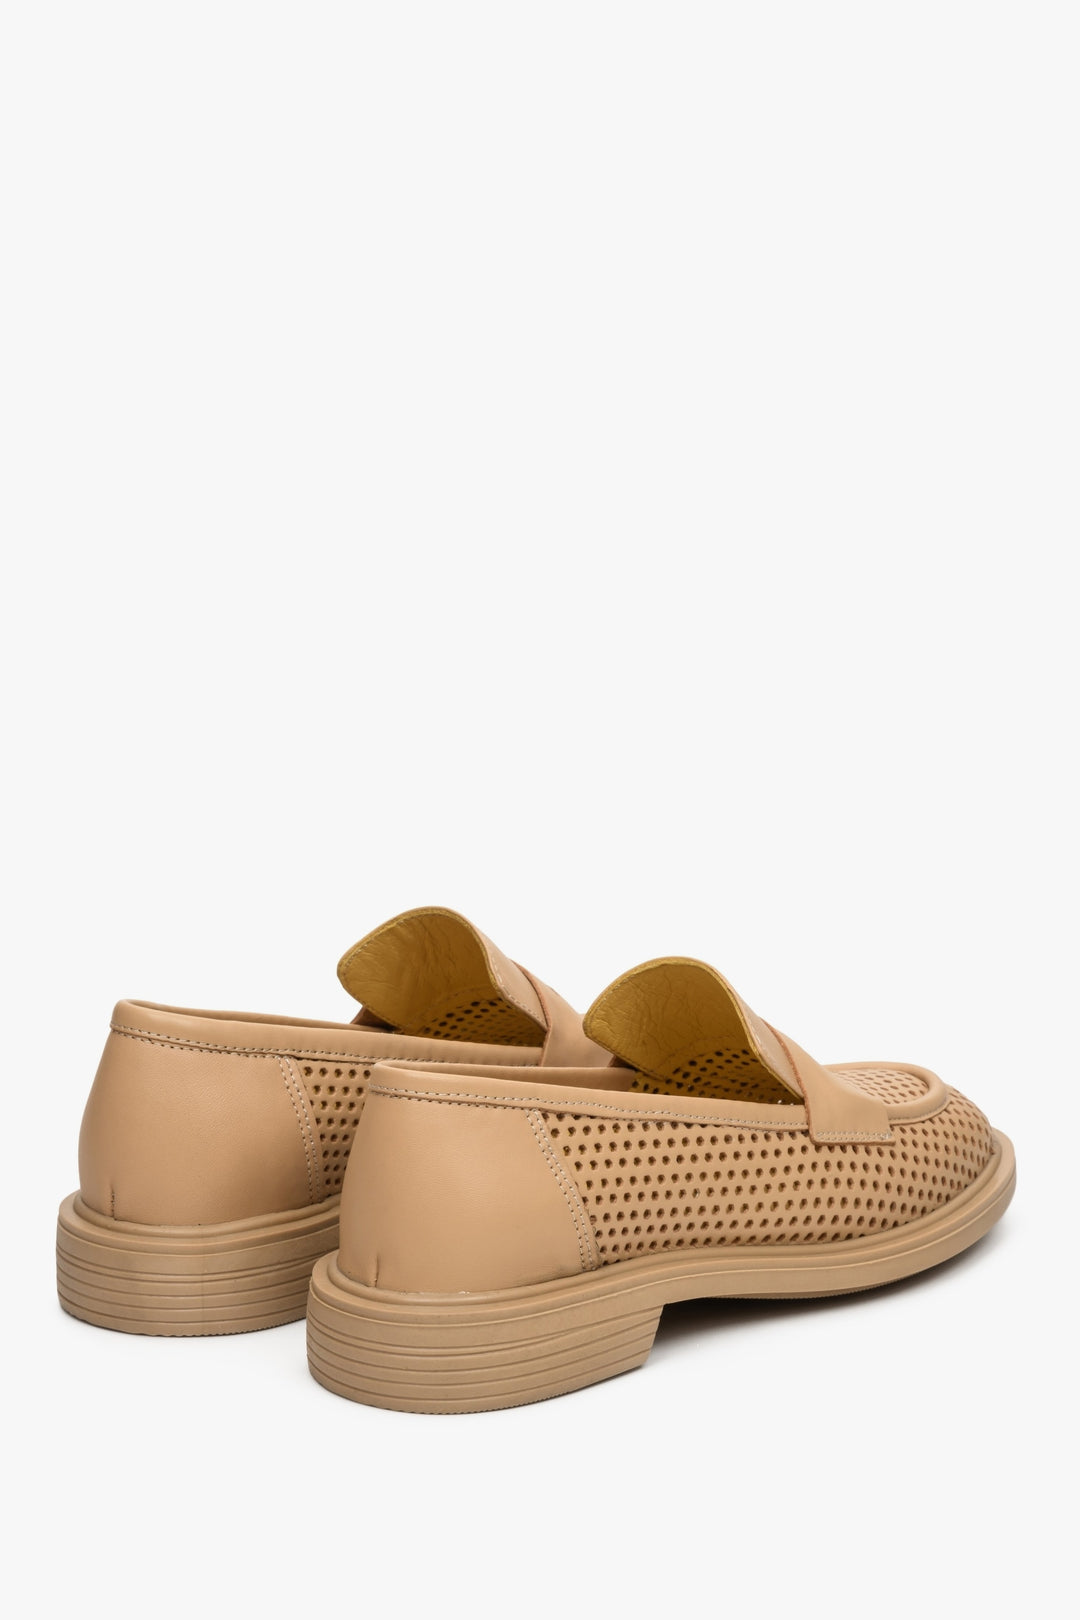 Women's Brown Leather Perforated Loafers for Summer Estro ER00112828